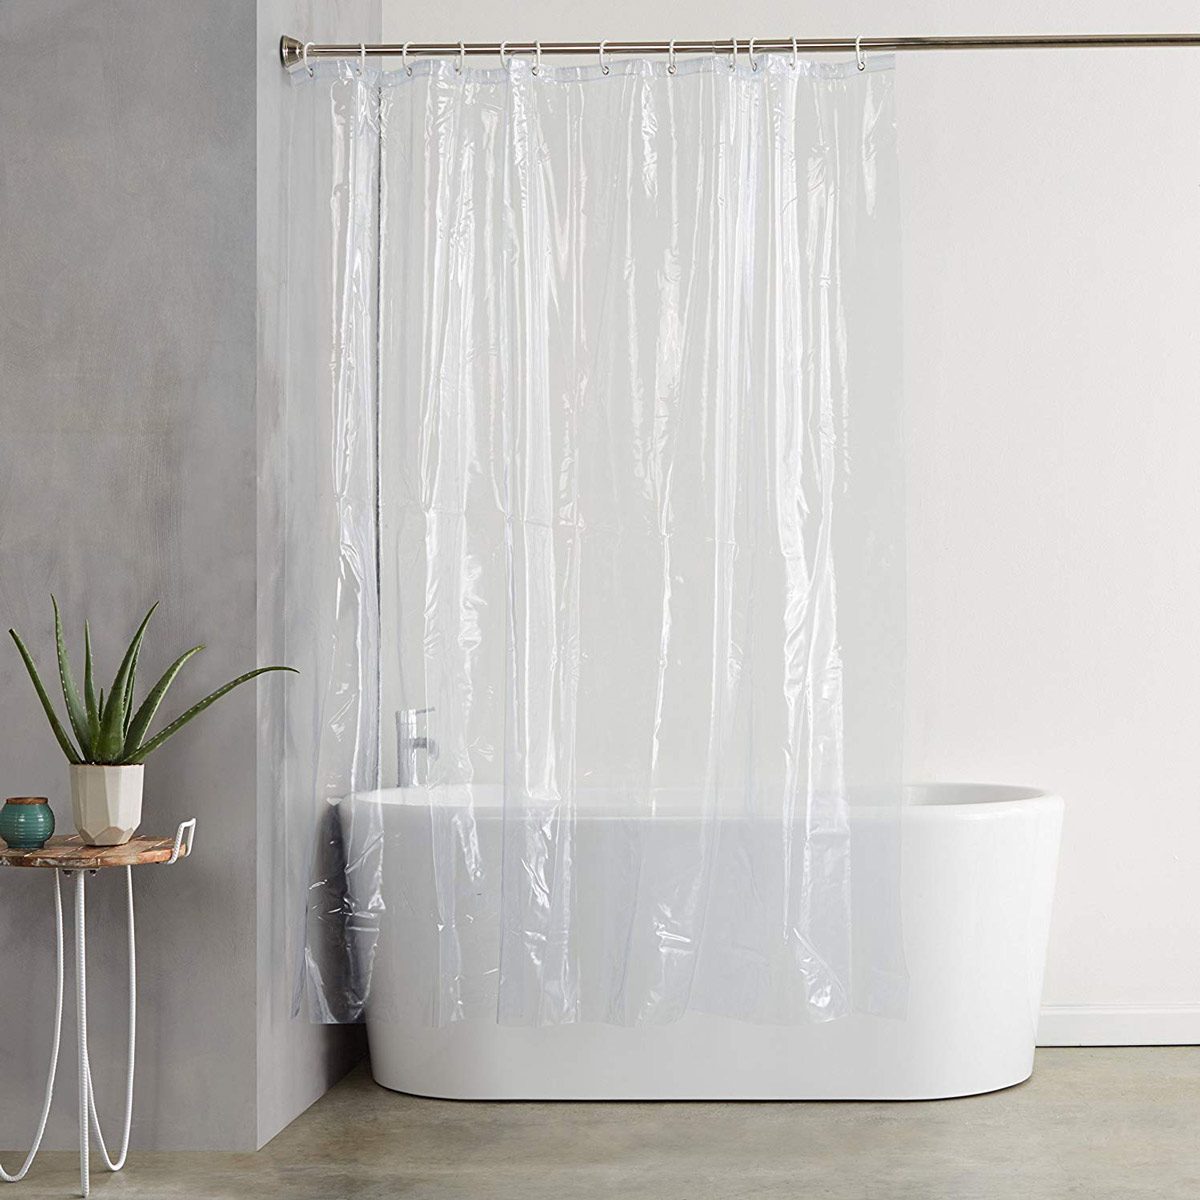 How Often Should You Replace Towels, Shower Curtain Liners, & More